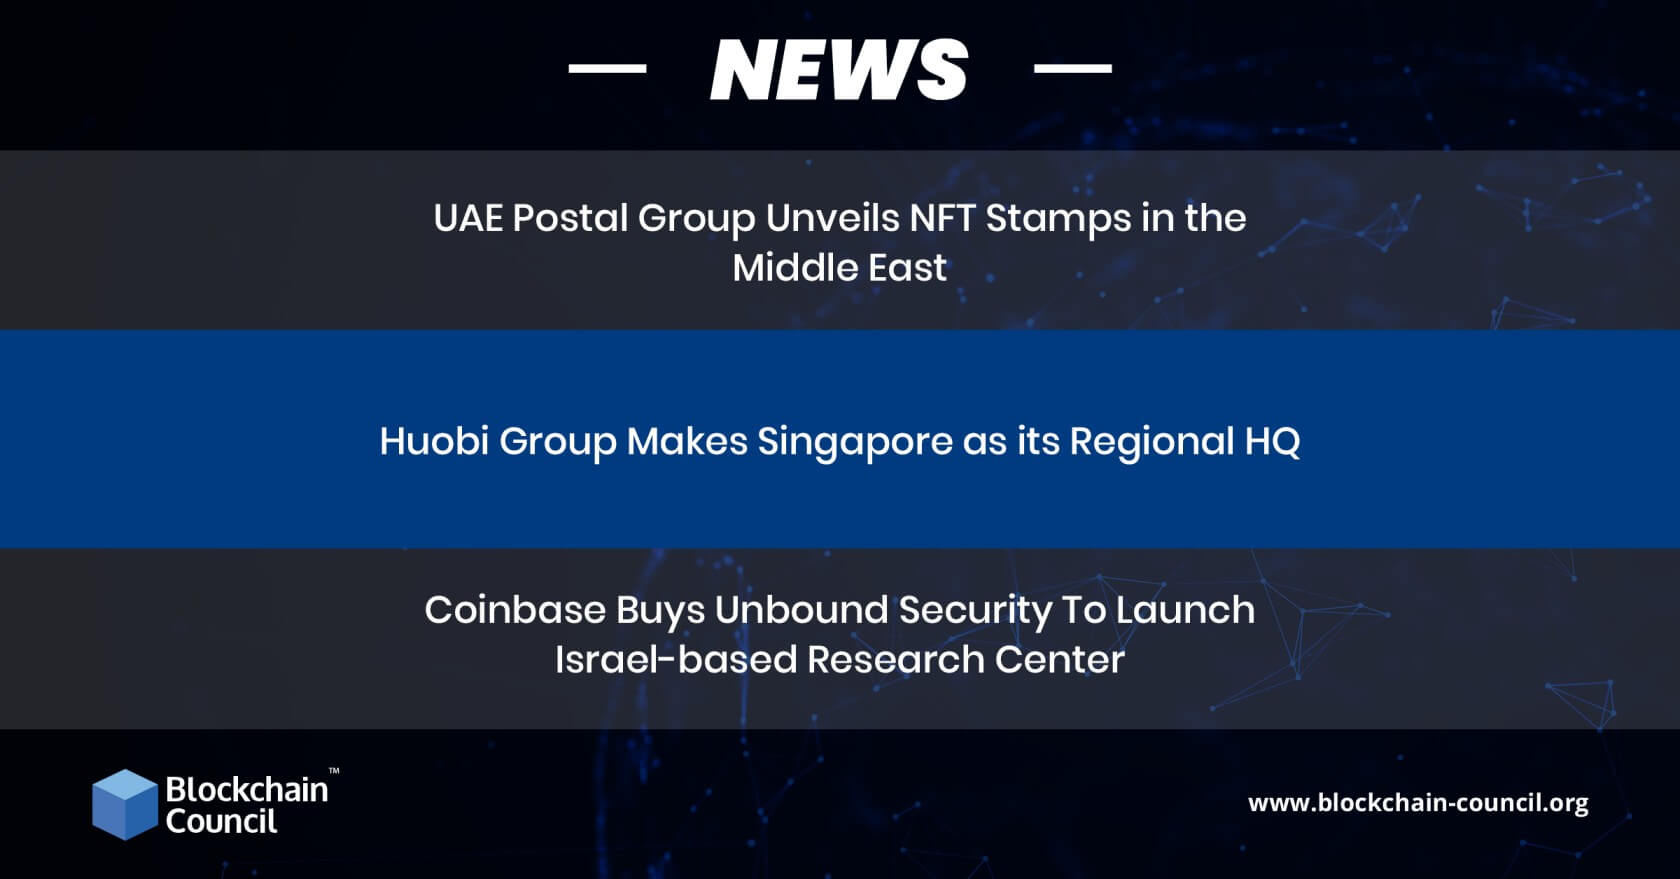 UAE Postal Group Unveils NFT Stamps in the Middle East (3)